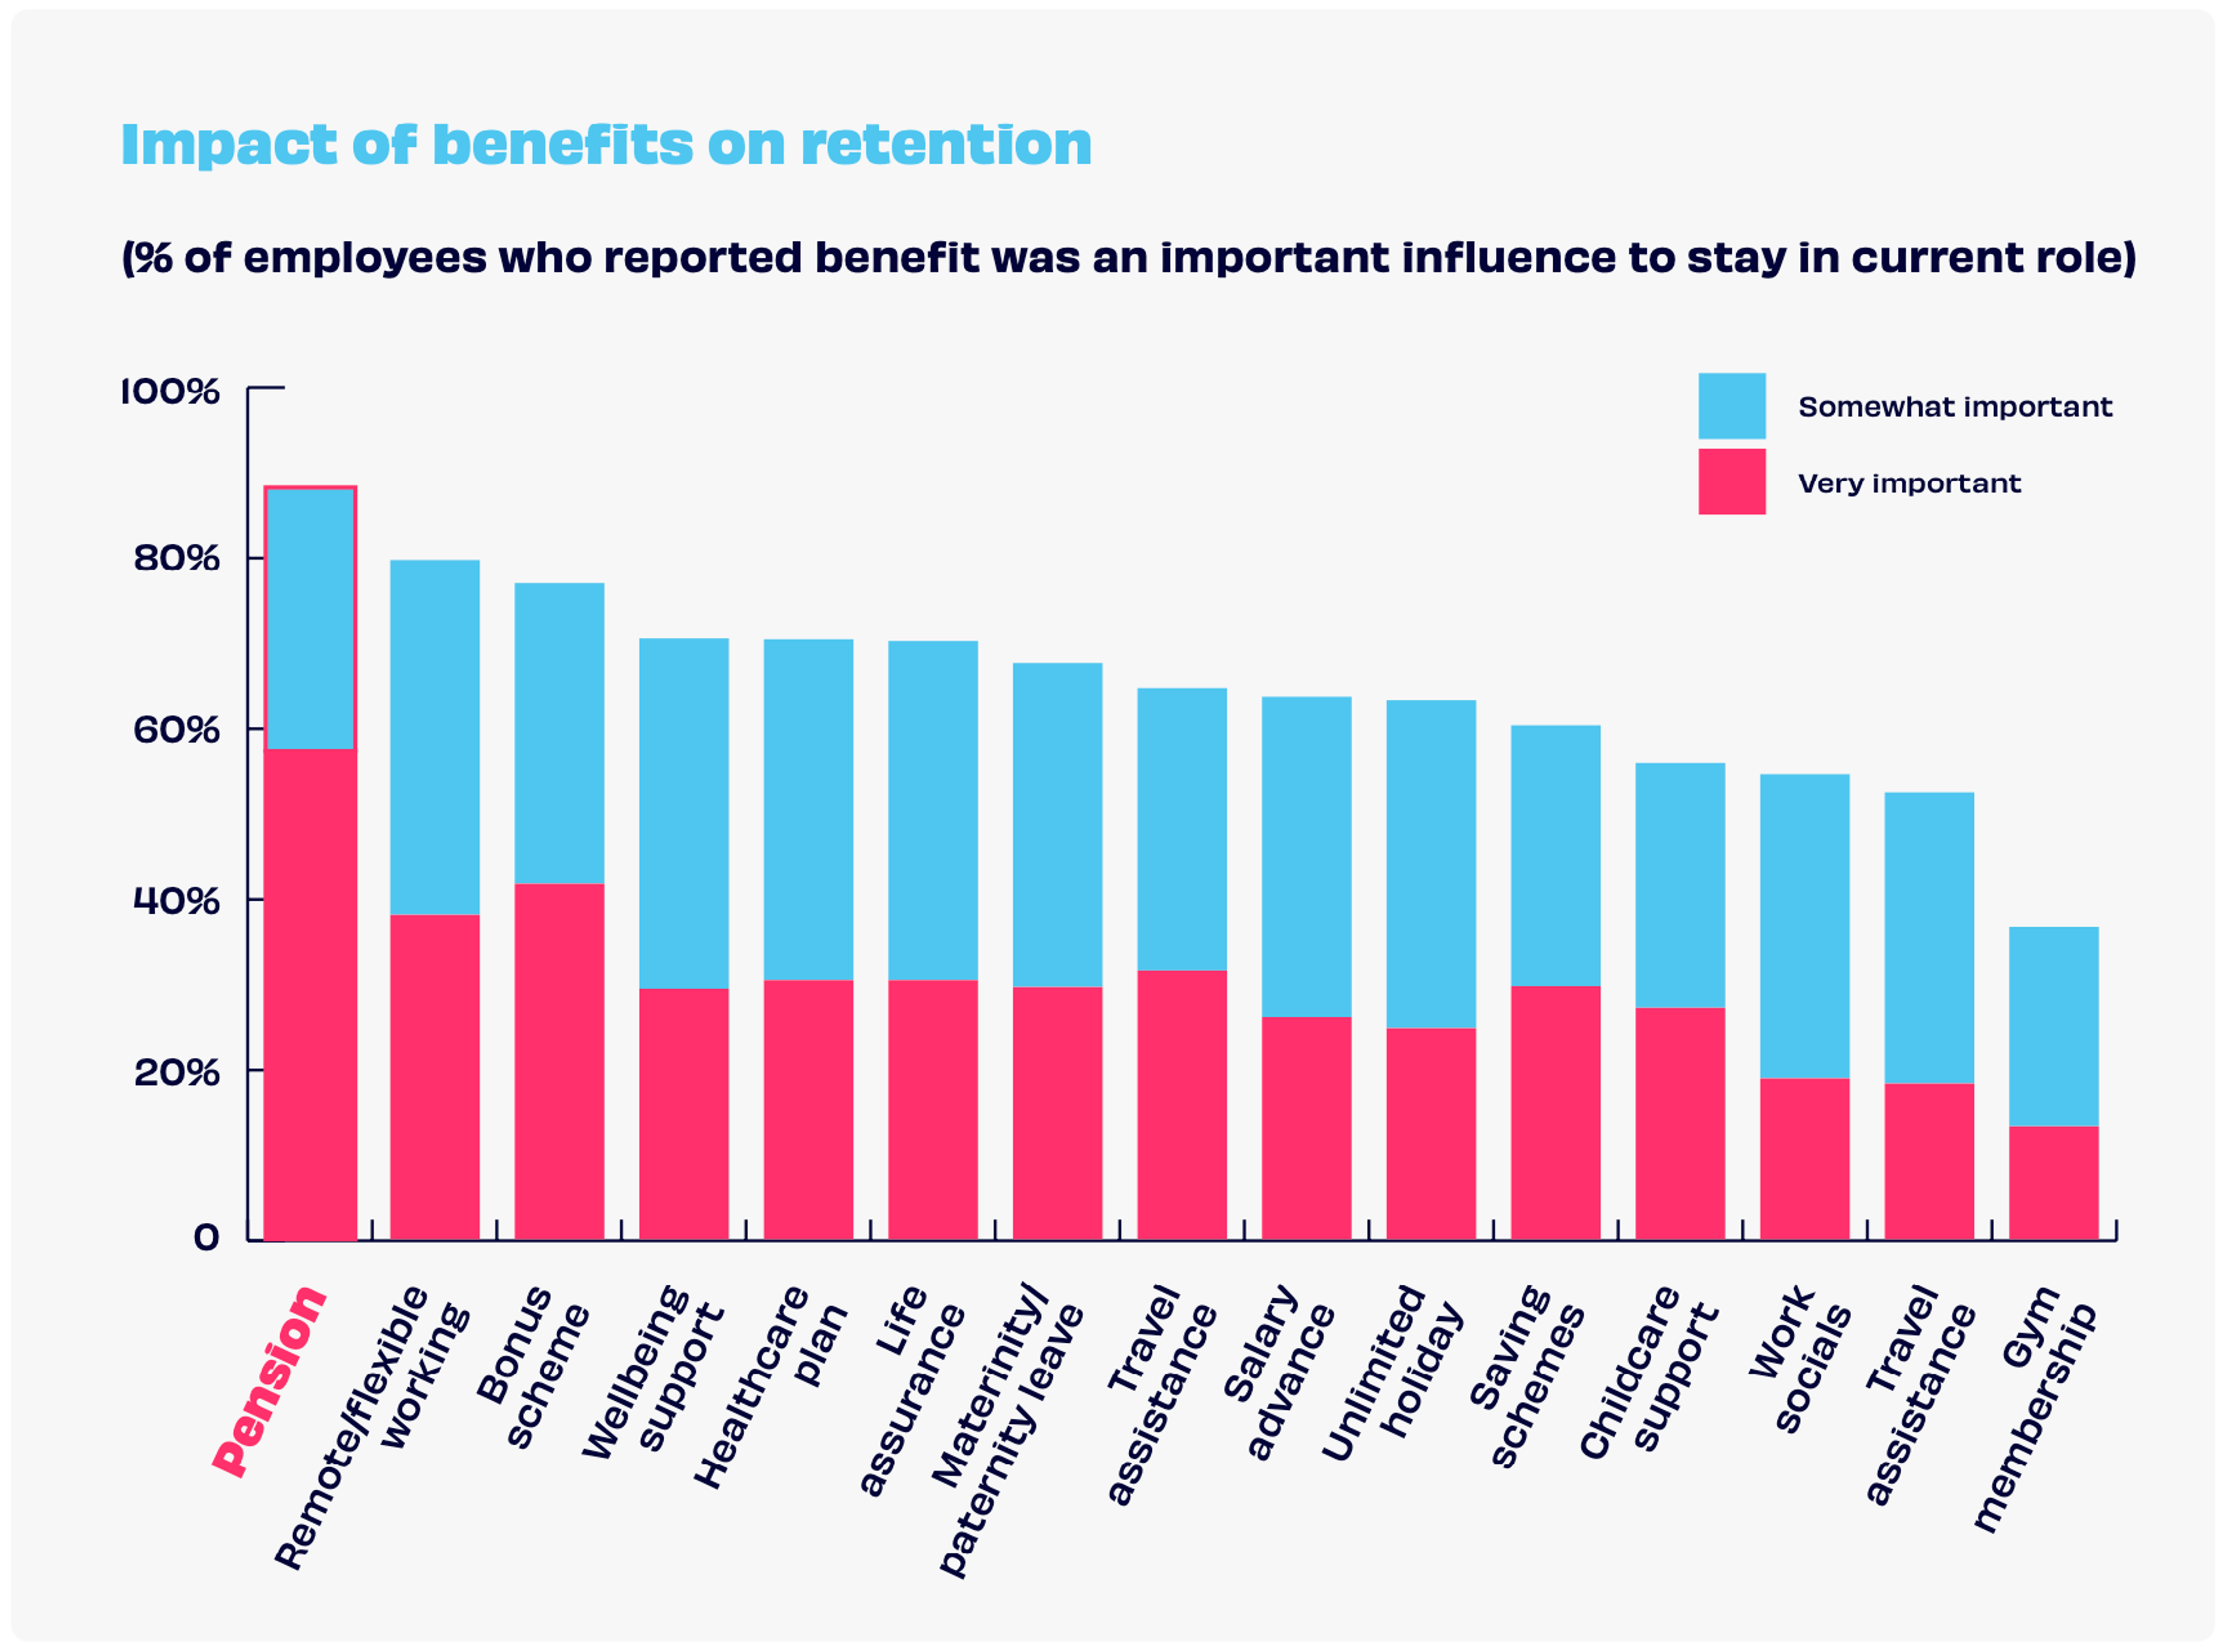 A column chart showing the impact of benefits on retention